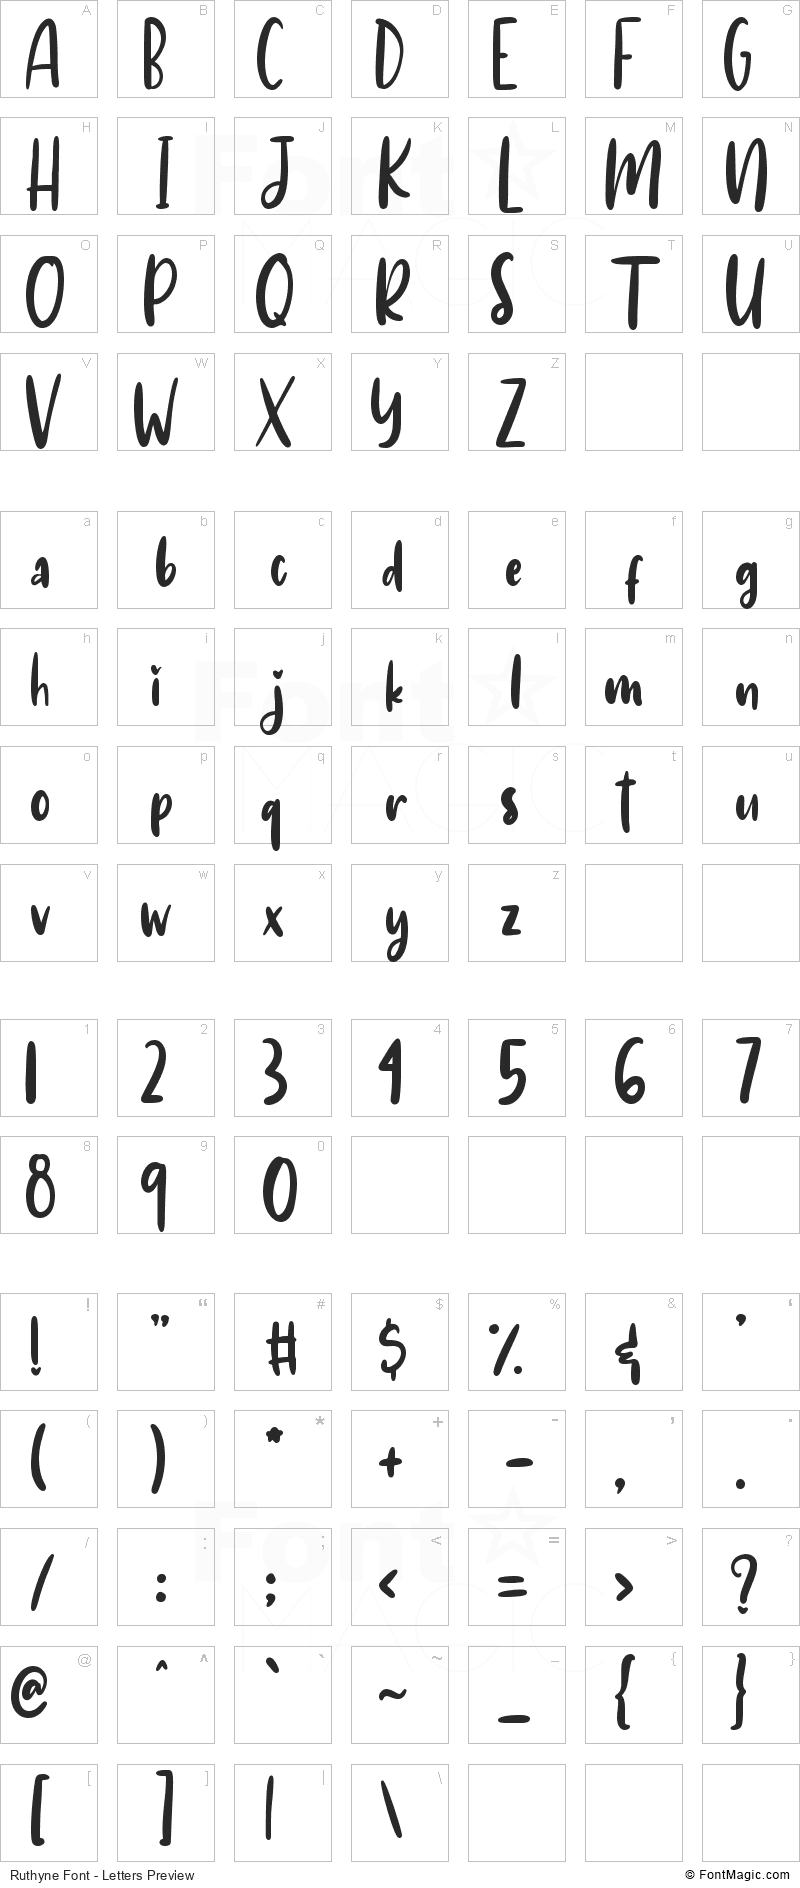 Ruthyne Font - All Latters Preview Chart